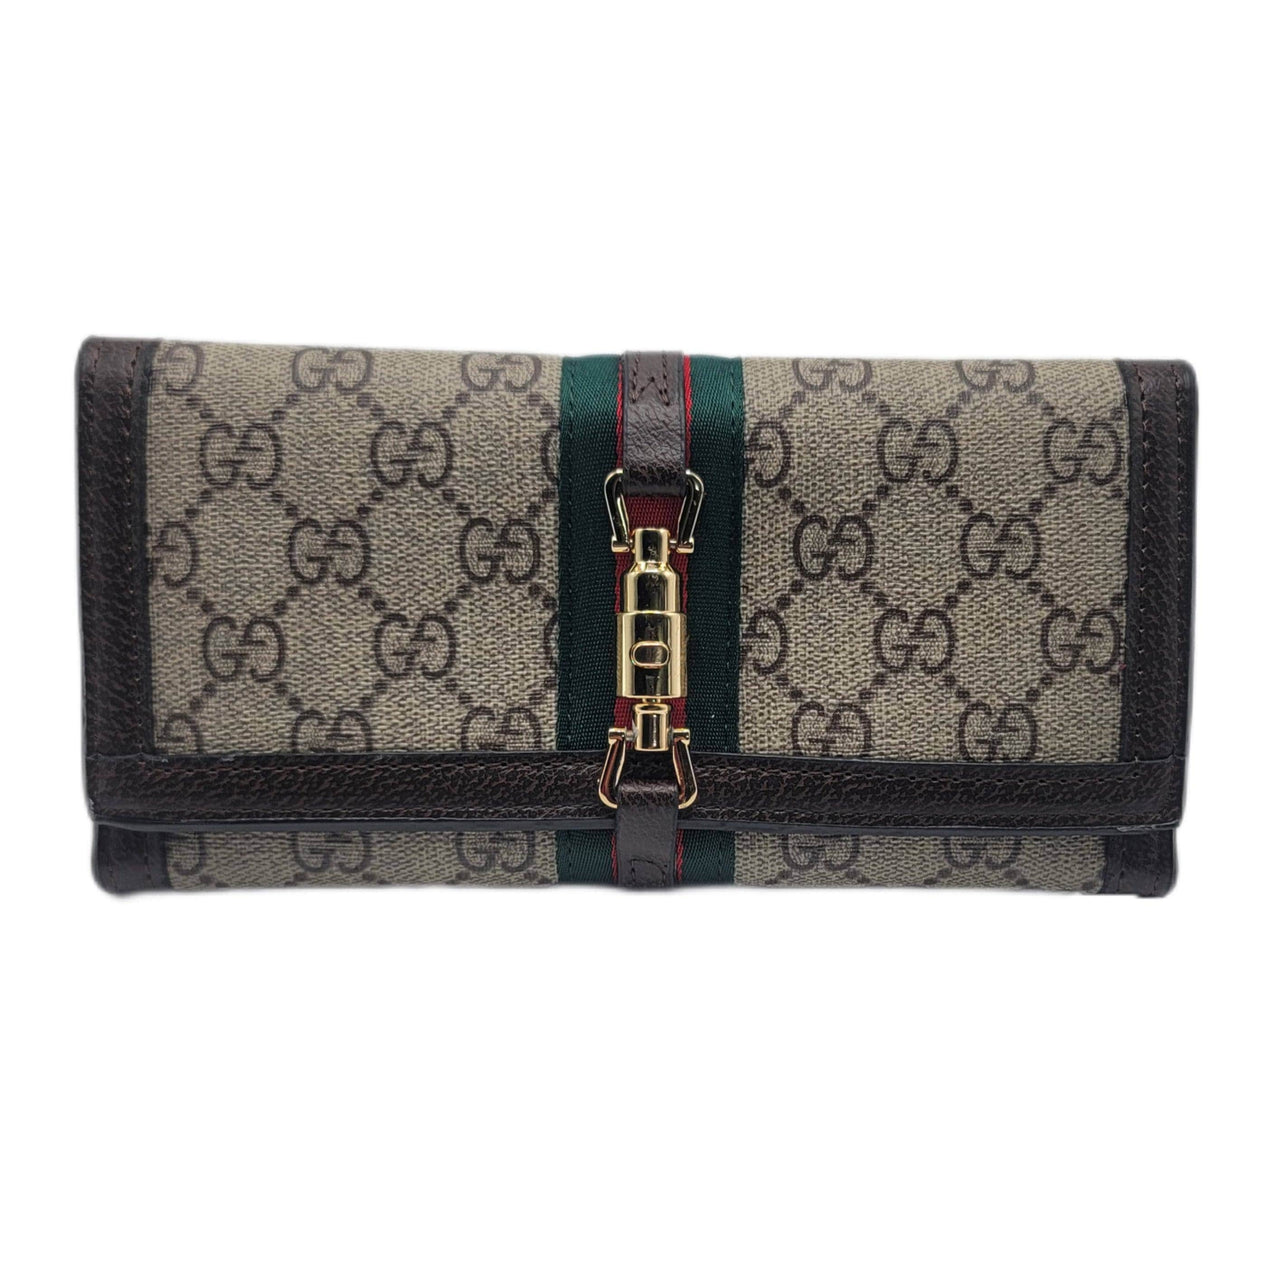 The Bag Couture Luggage & Bags Gucci 3 Fold Wallet BL